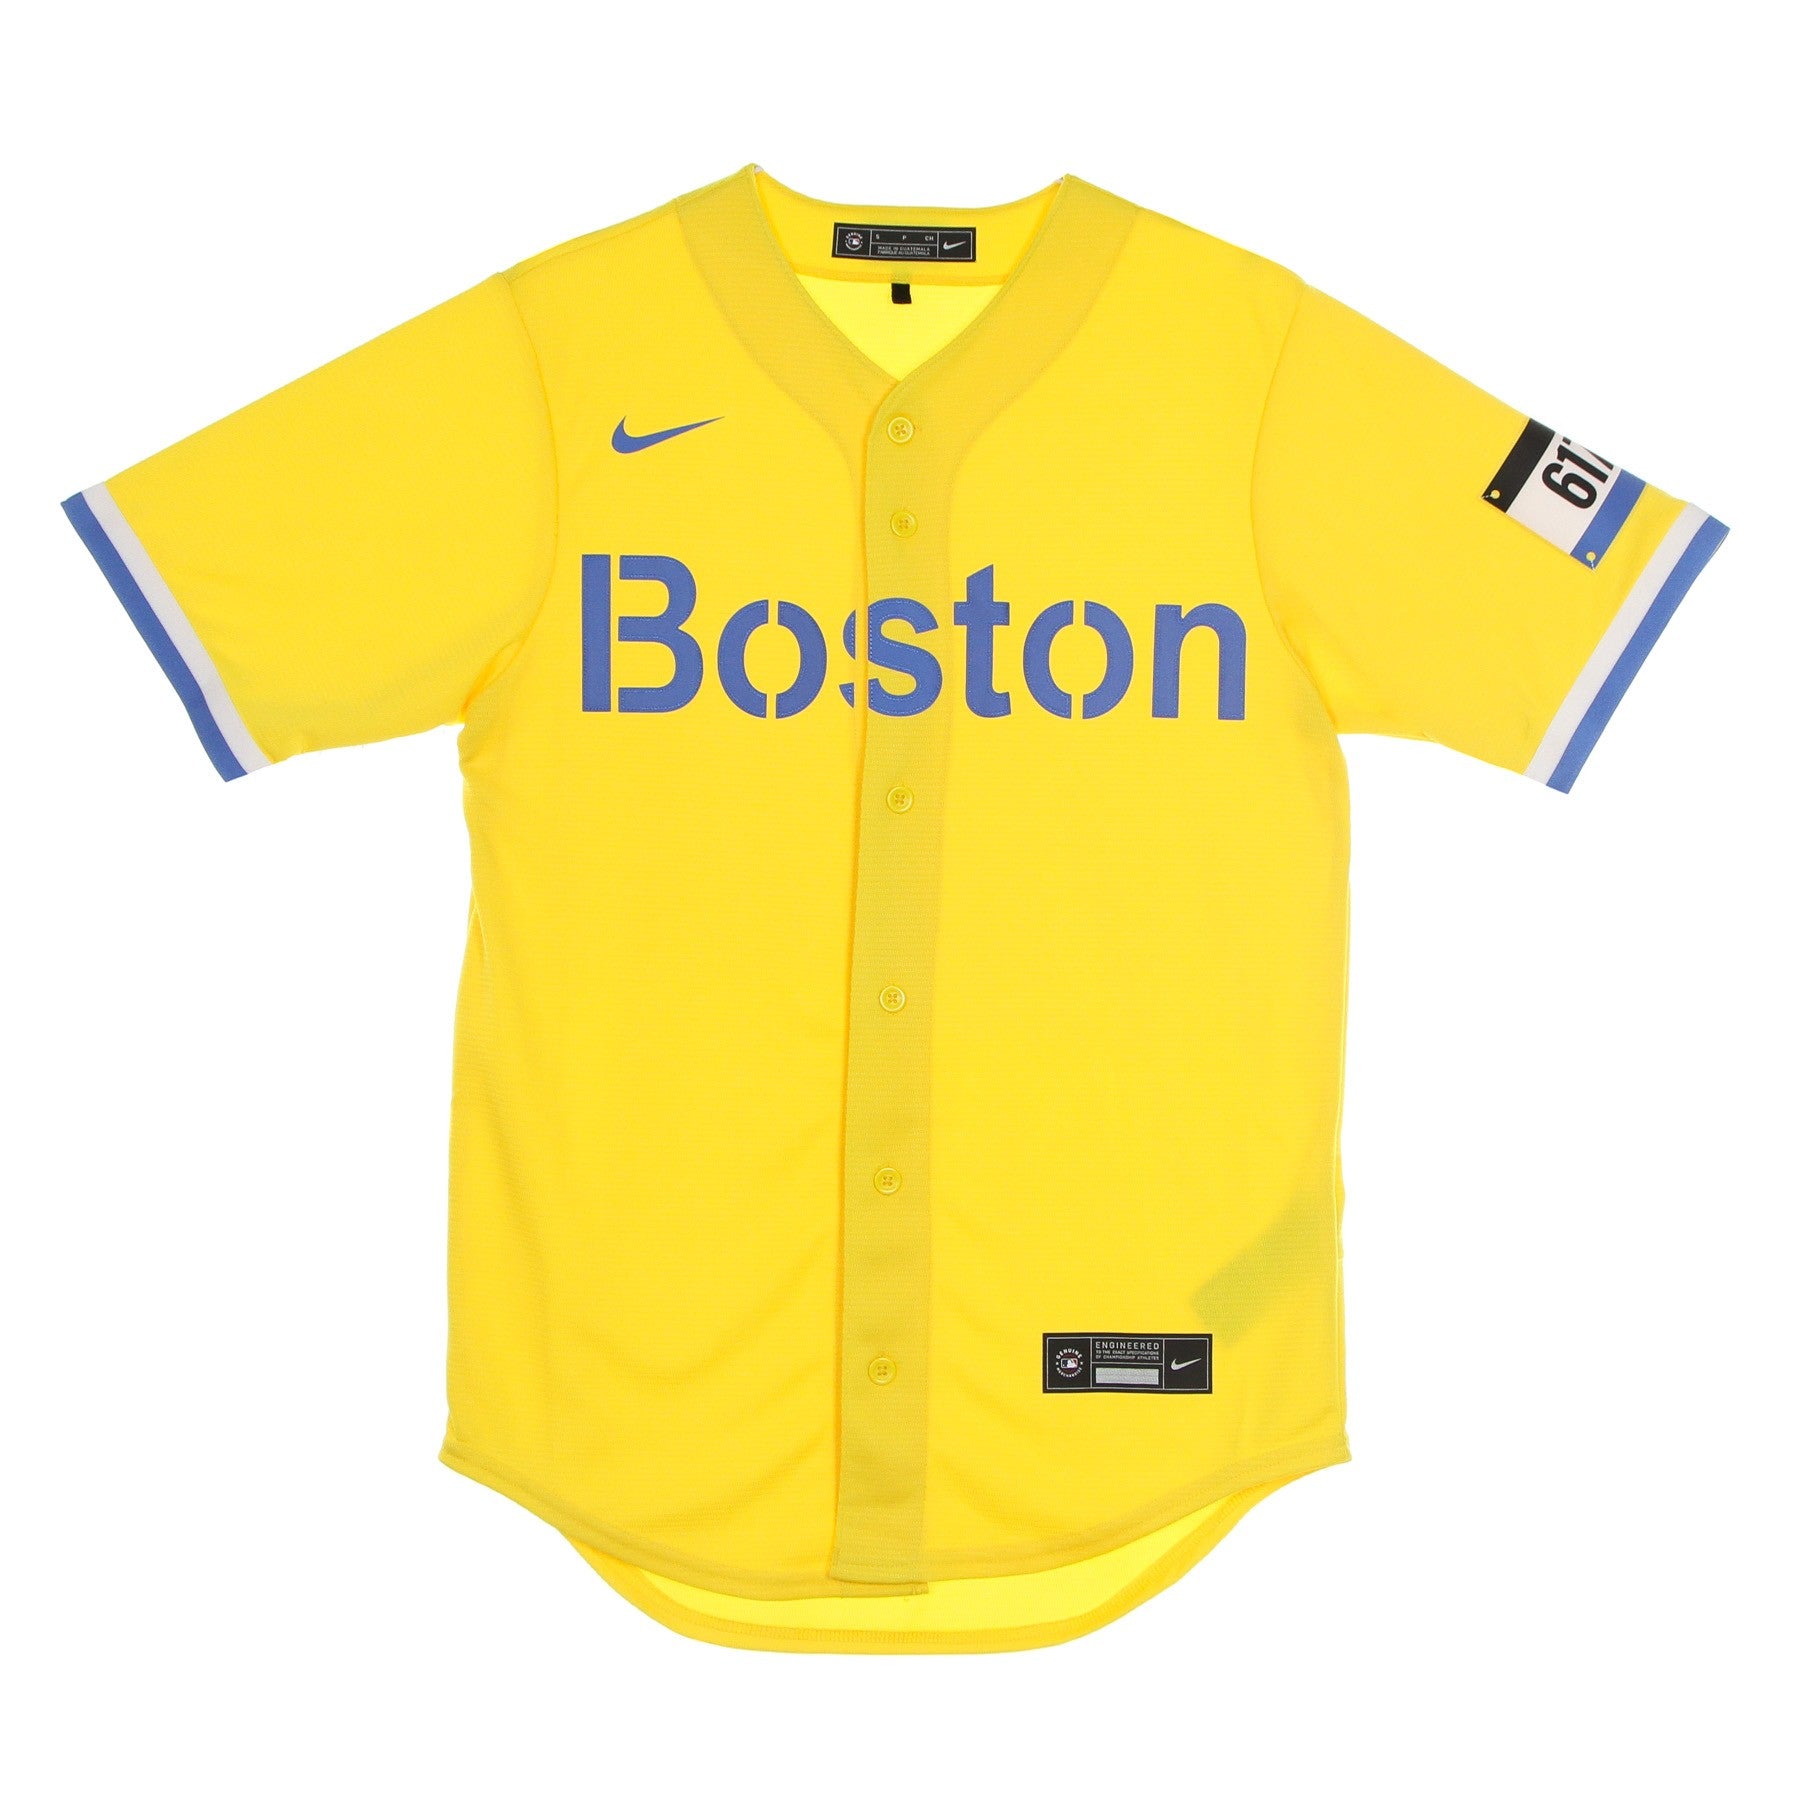 Nike Mlb, Casacca Baseball Uomo Mlb Official Replica Jersey City Connect Bosred, Yellow